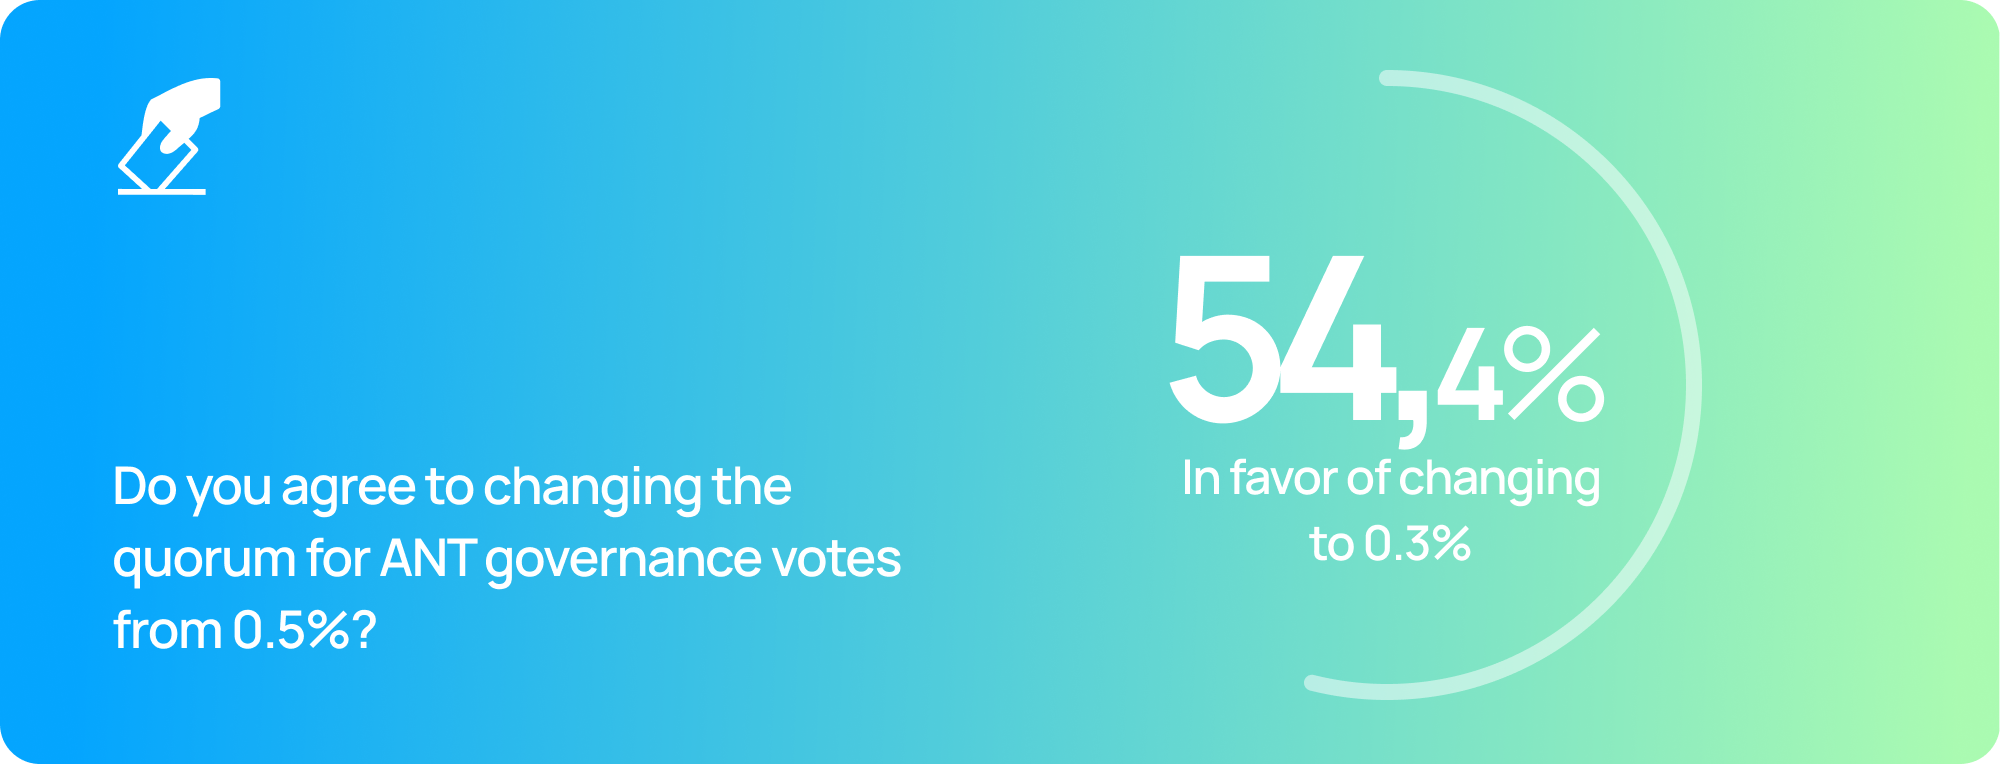 54.4% in favor of changing to 0.3% governance votes